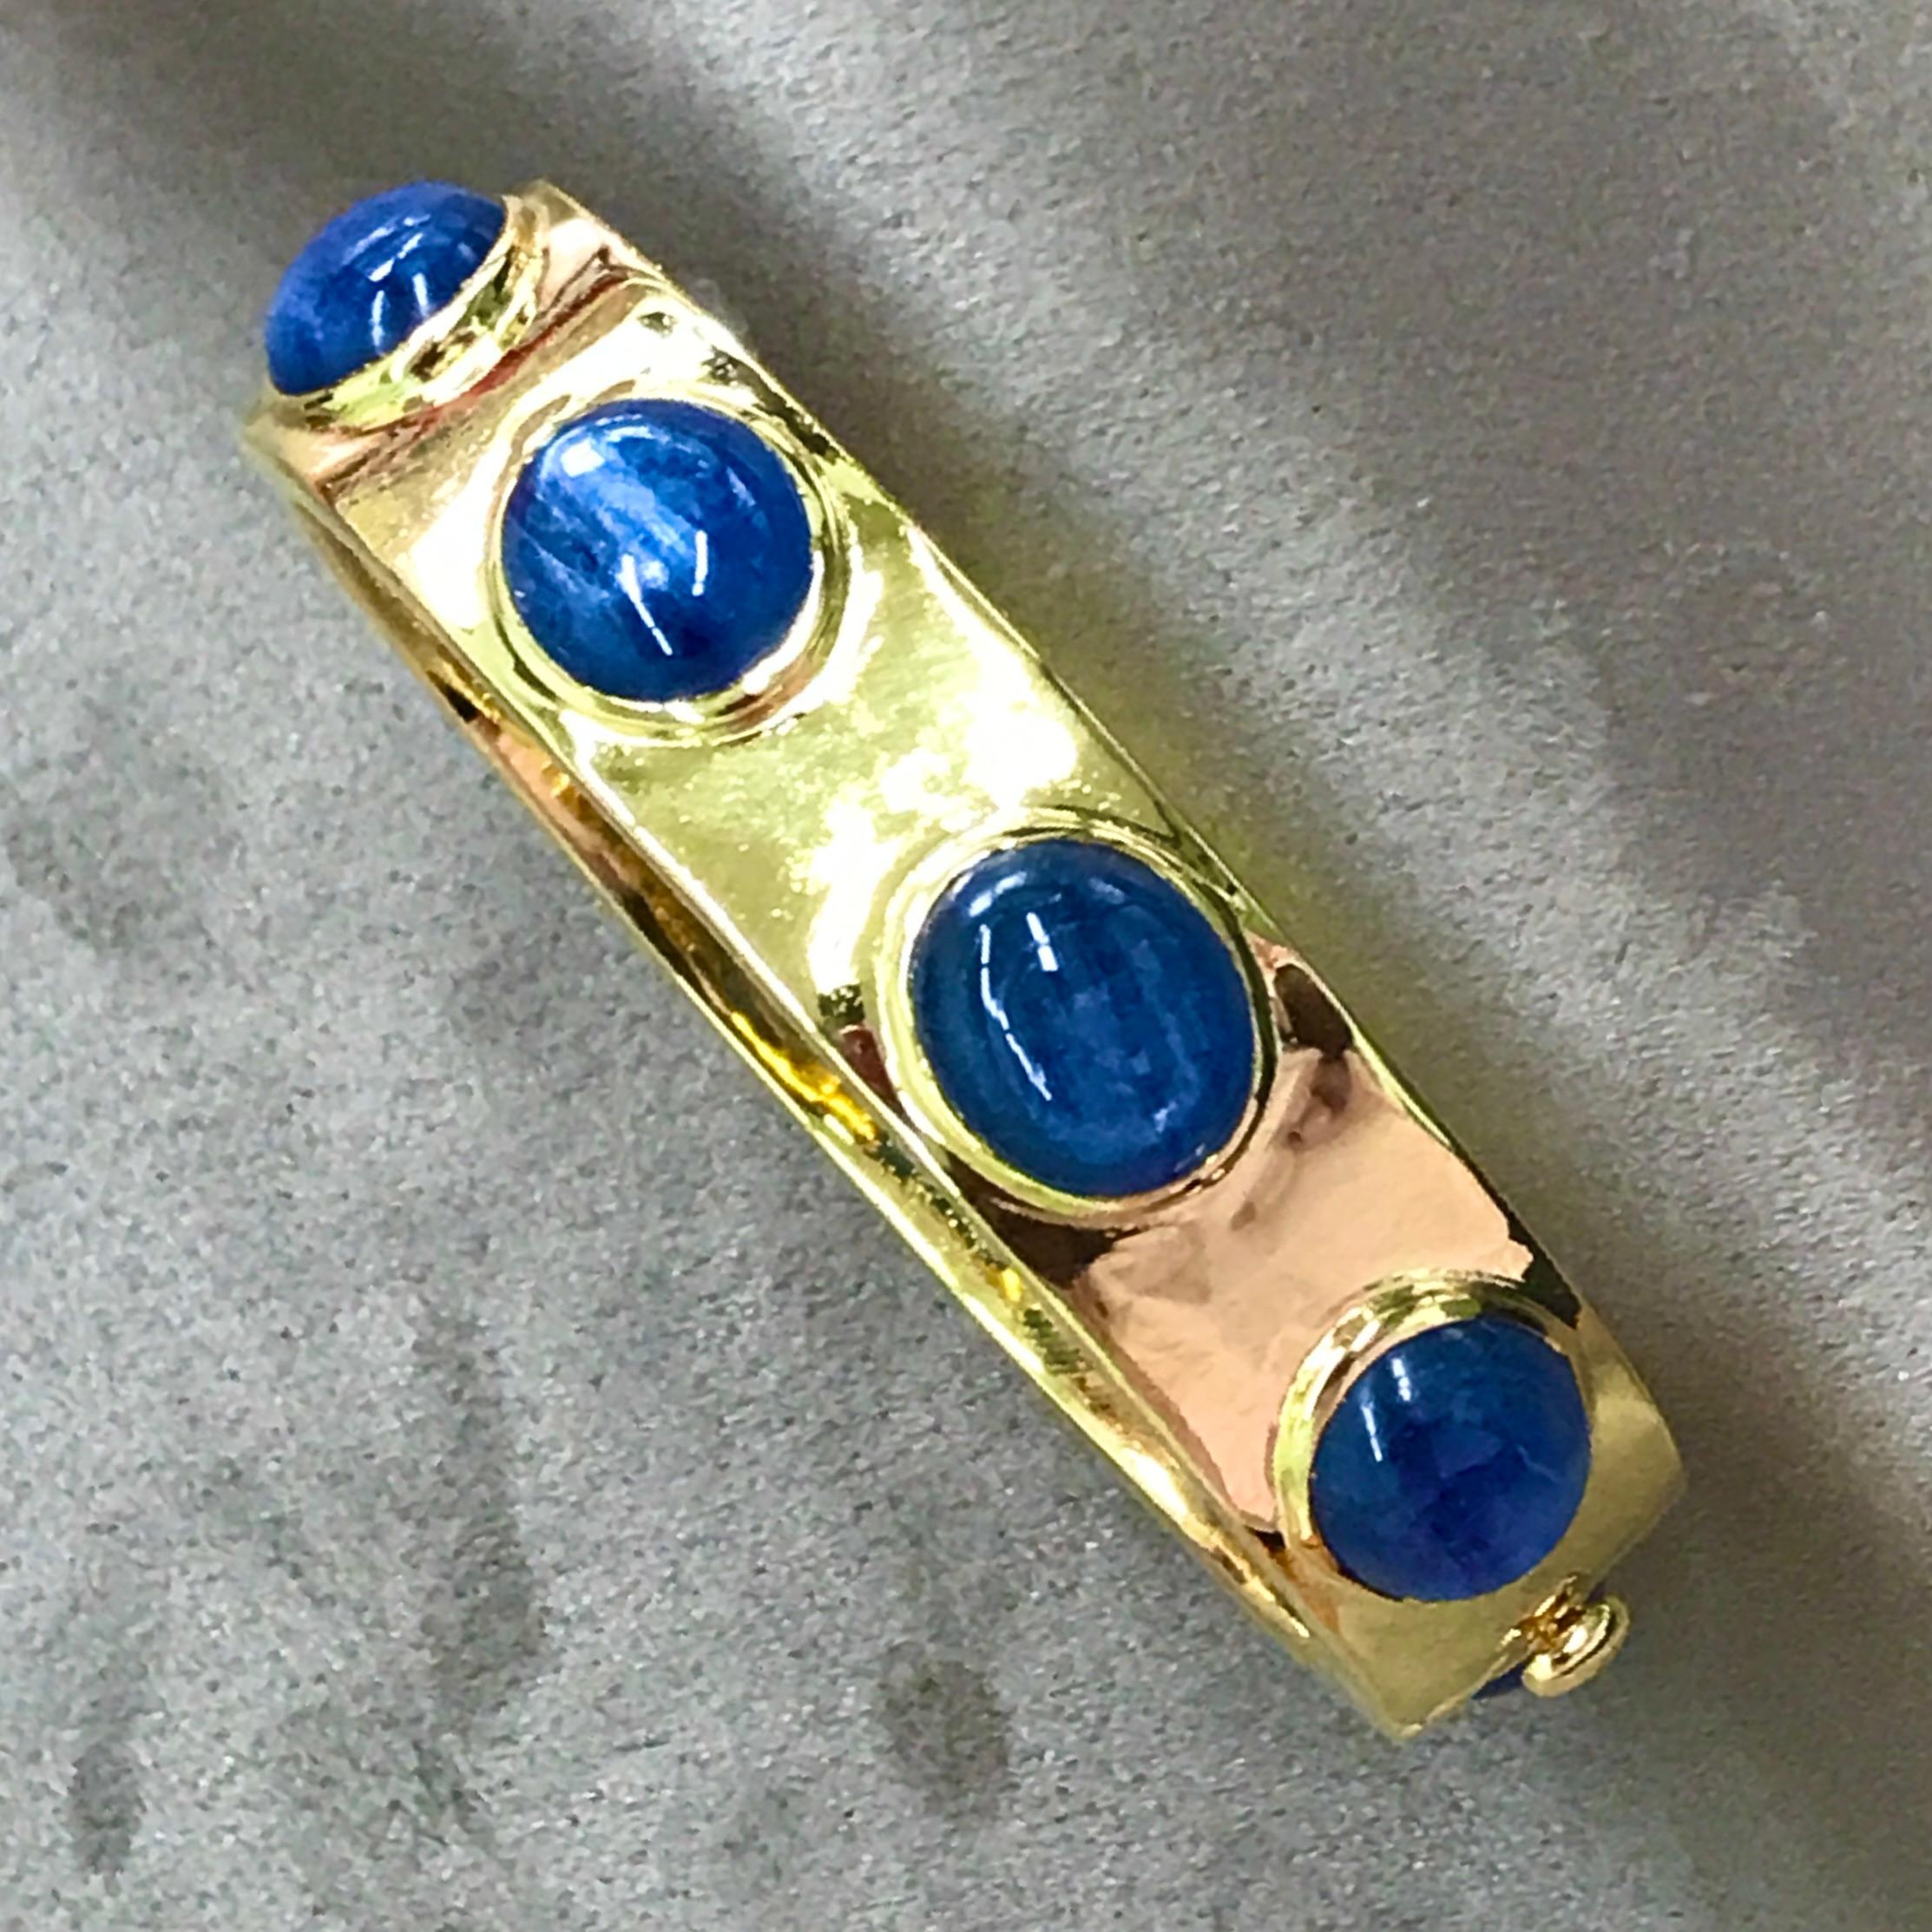 An extremely stylish, substantial and elegant hinged cuff, bezel set with 8 cabochon Kyanite of a lovely iridescent dark blue colour.  We love the proportions of this cuff - discreet enough to be worn everyday, yet striking enough to be noticed in